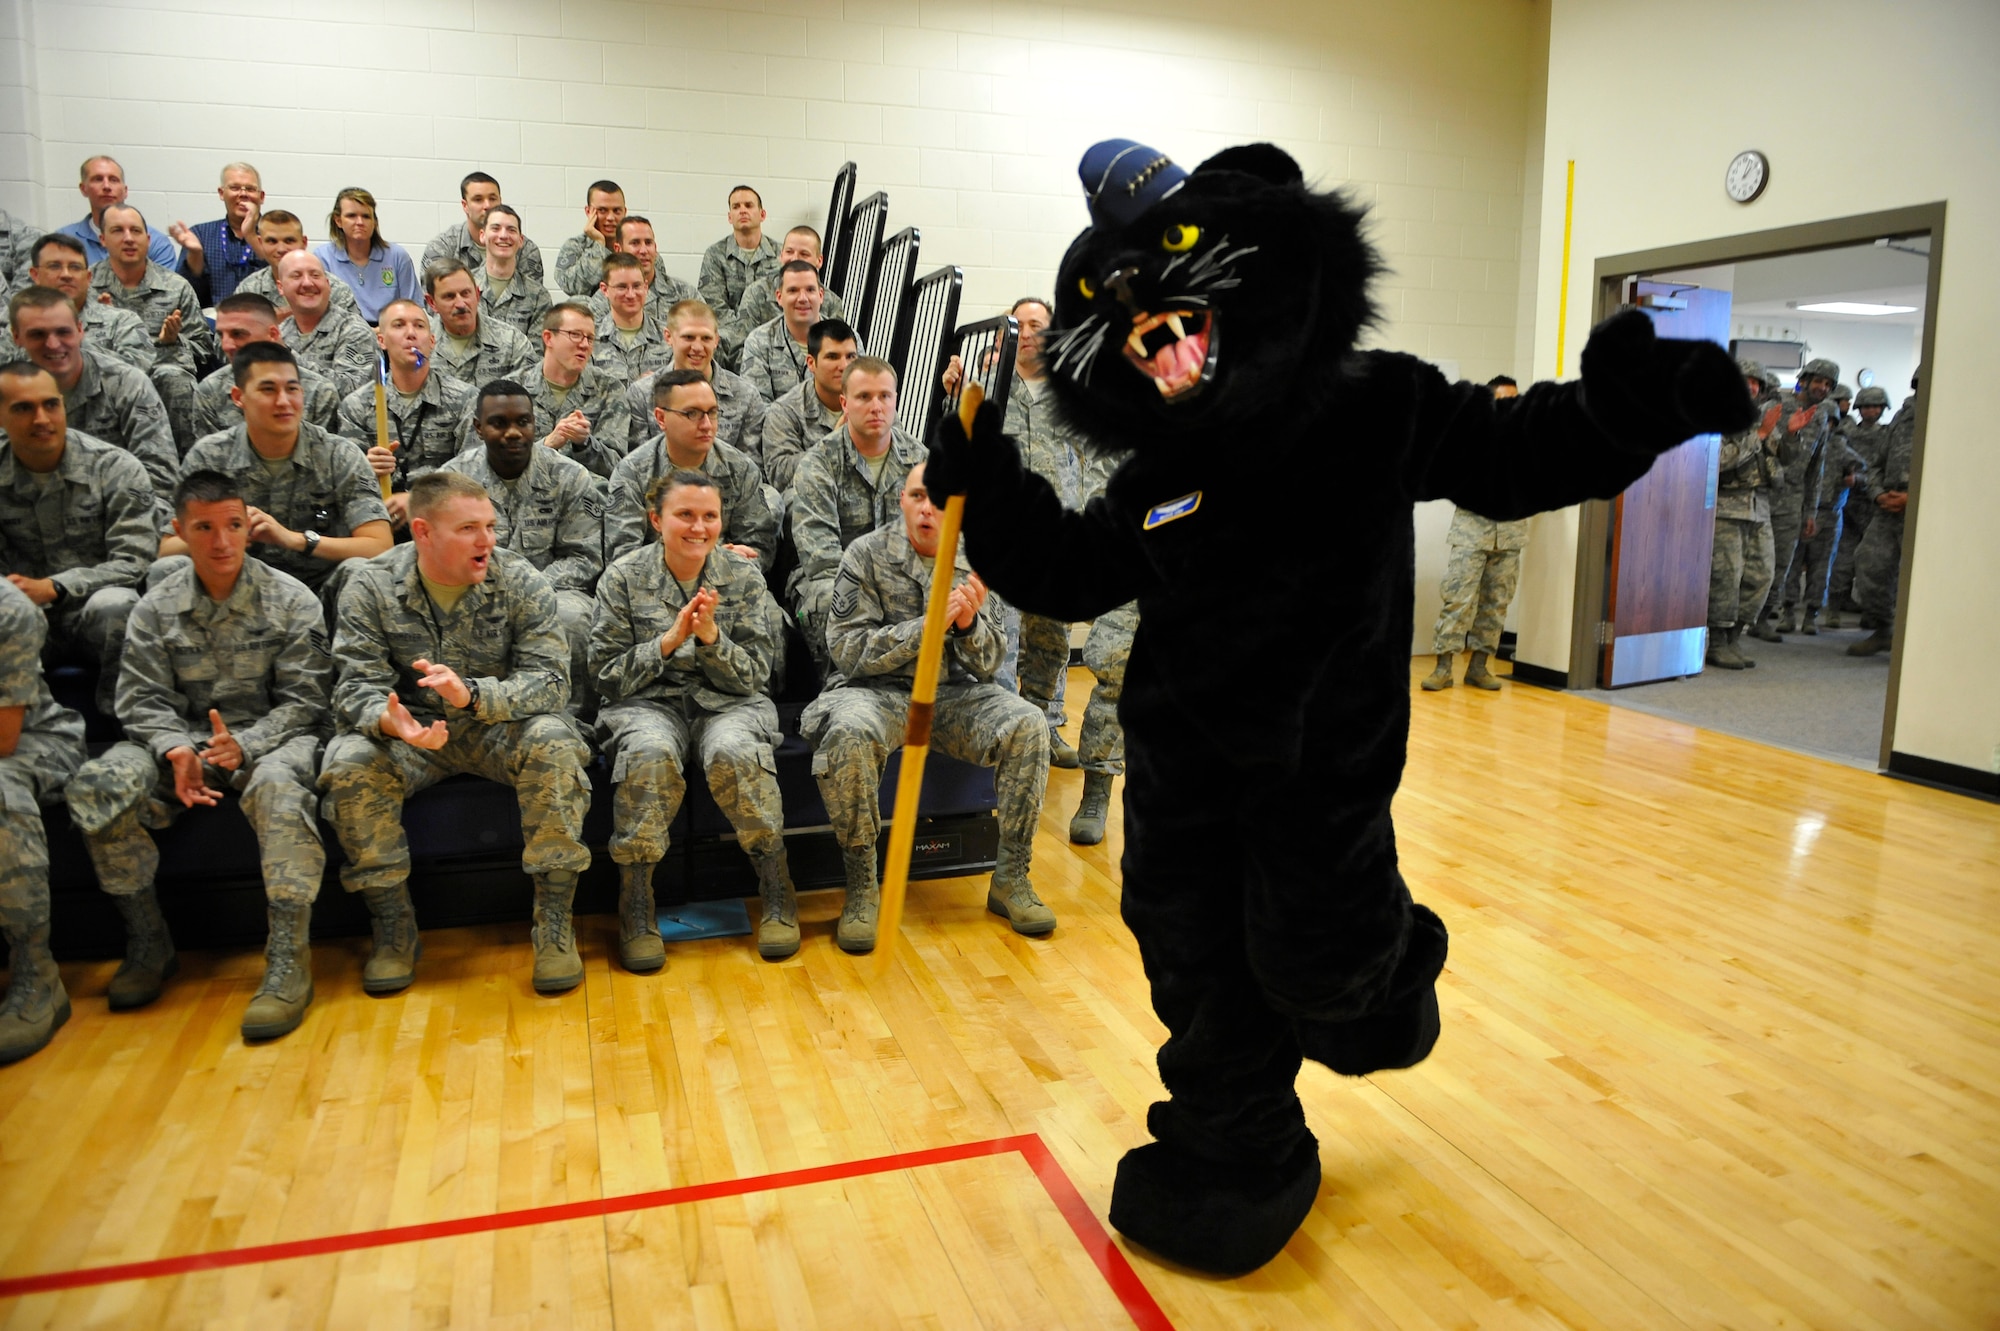 BUCKLEY AIR FORCE BASE, Colo. – Panther “General Buck Lee,” 460th Space Wing mascot, dances his way into the Buckley Fitness Center gym May 4, 2012, to kick off a commander’s call. Hundreds of Airmen rallied into the gym to review expectations of the upcoming Operational Readiness Inspection, which is scheduled for May 11-22. (U.S. Air Force photo by Staff Sgt. Kathrine McDowell)